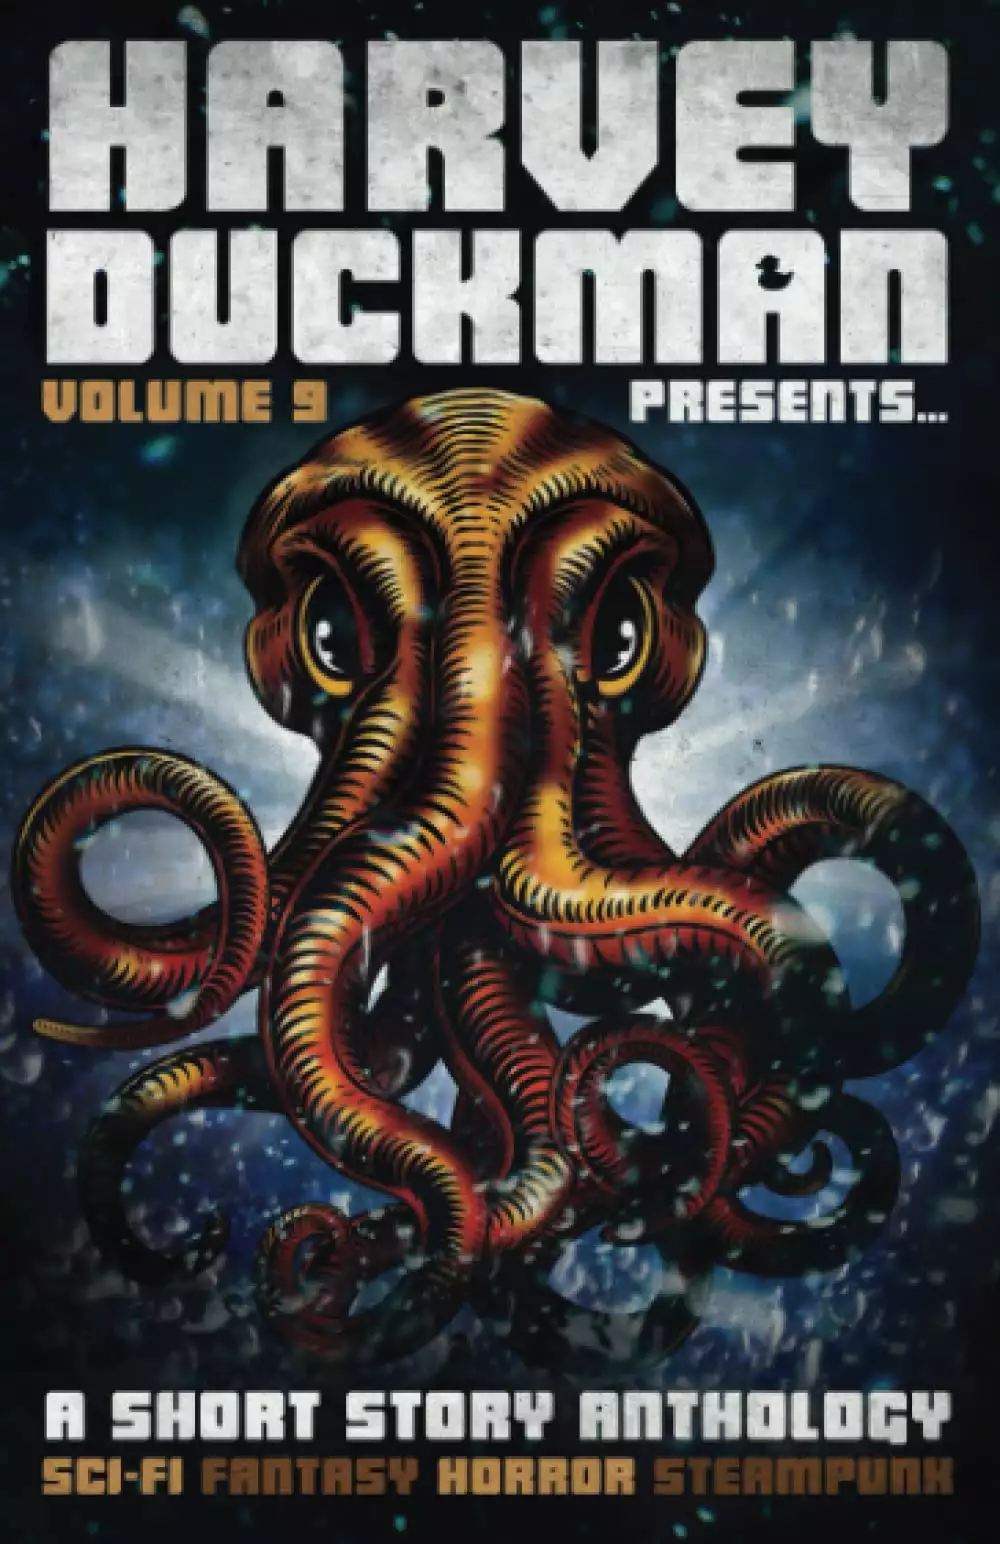 Harvey Duckman Presents... Volume 9: A Collection of Sci-Fi, Fantasy, Steampunk and Horror Short Stories